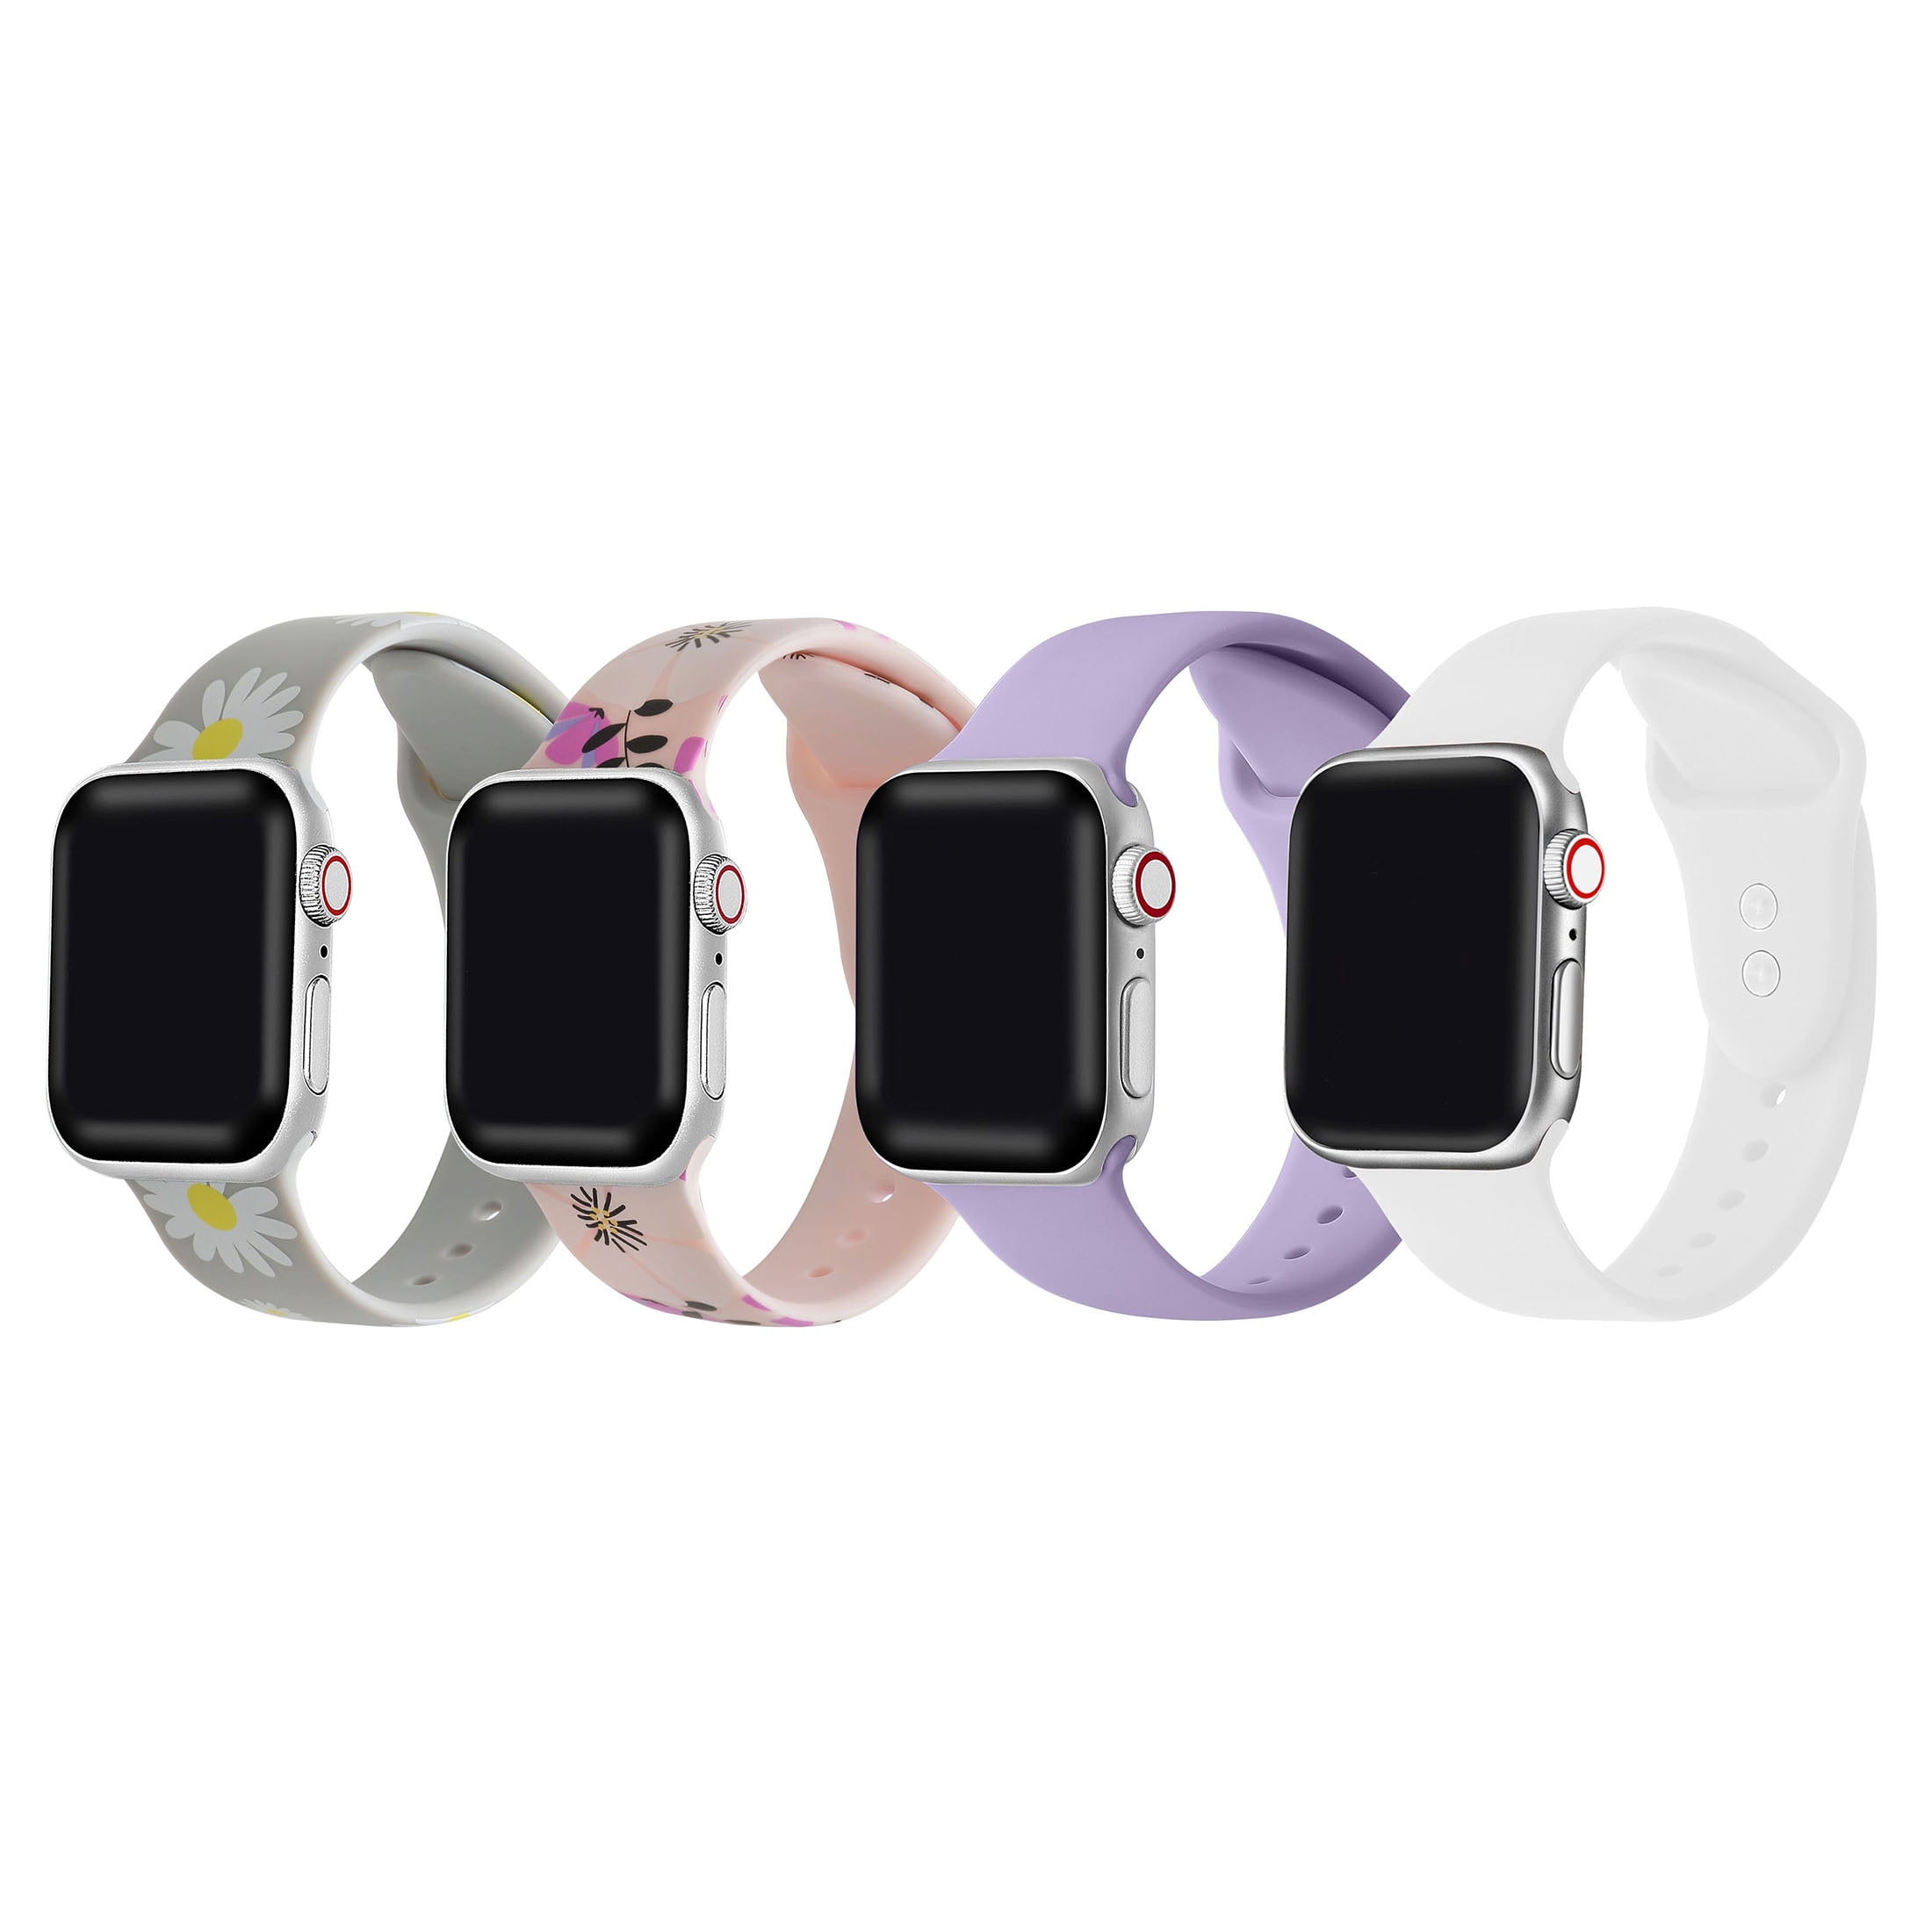 Posh Tech 4-Pack of Silicone Print Apple Watch Replacement Bands